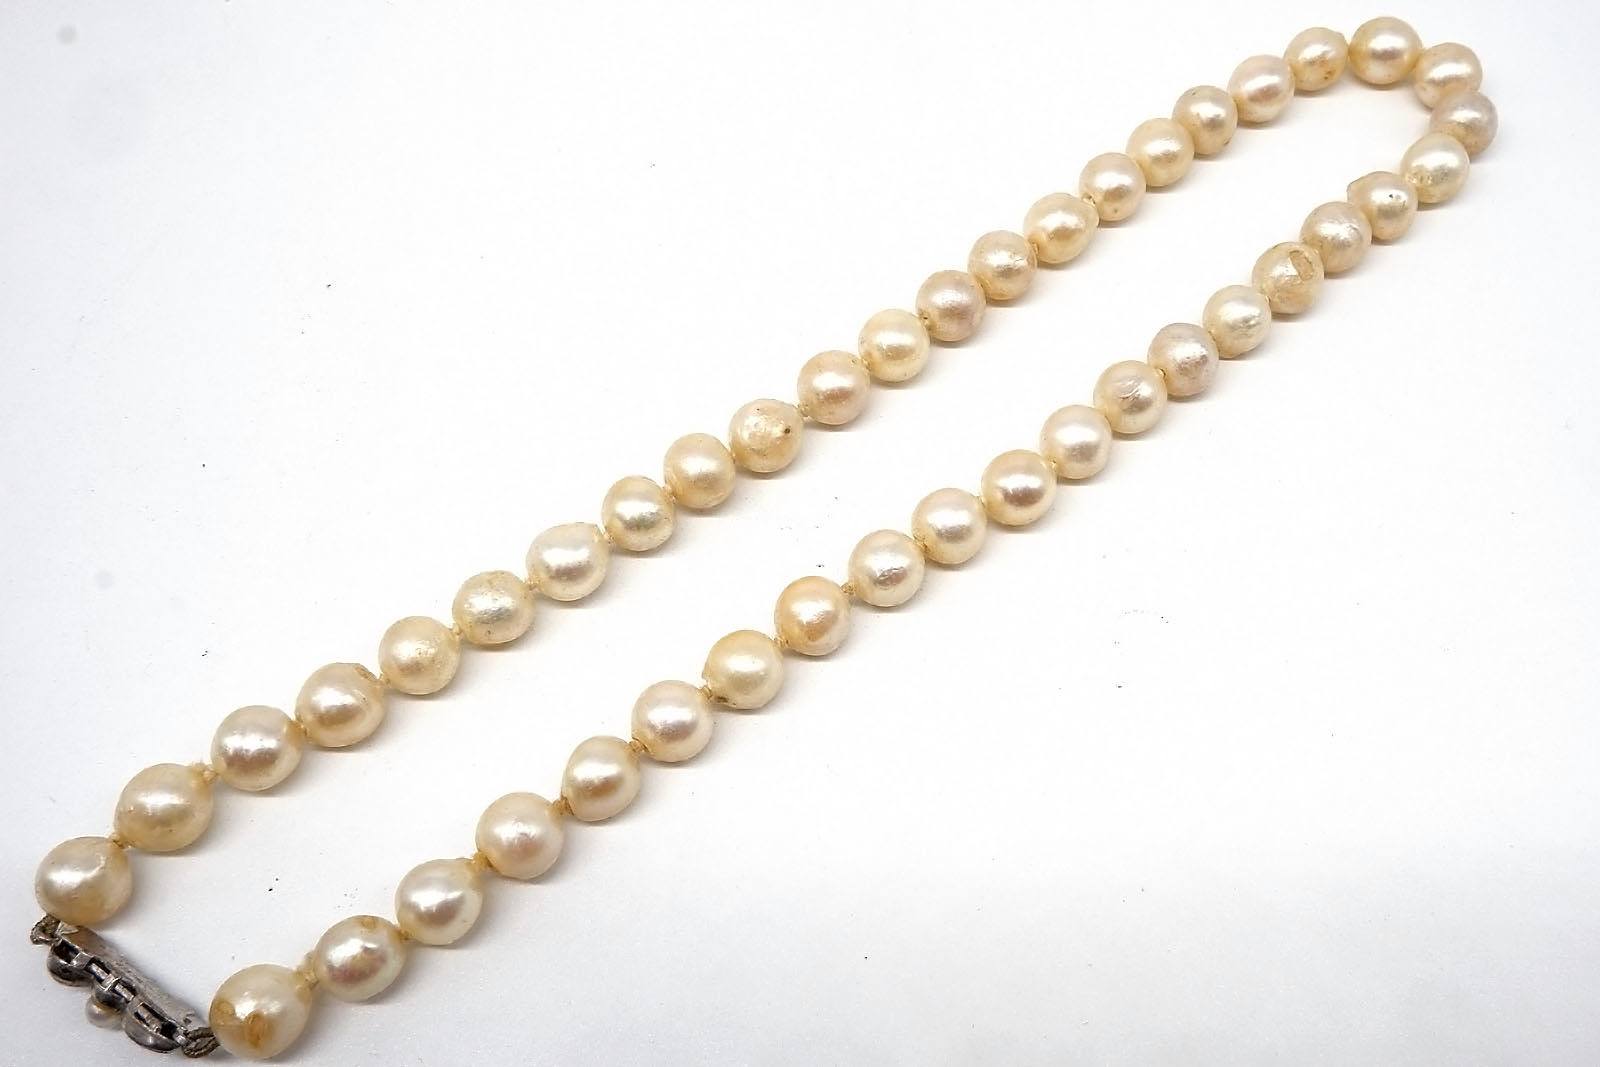 'Strand of Baroque Cultured Pearls, Creme with High Lustre, Akoya Type '